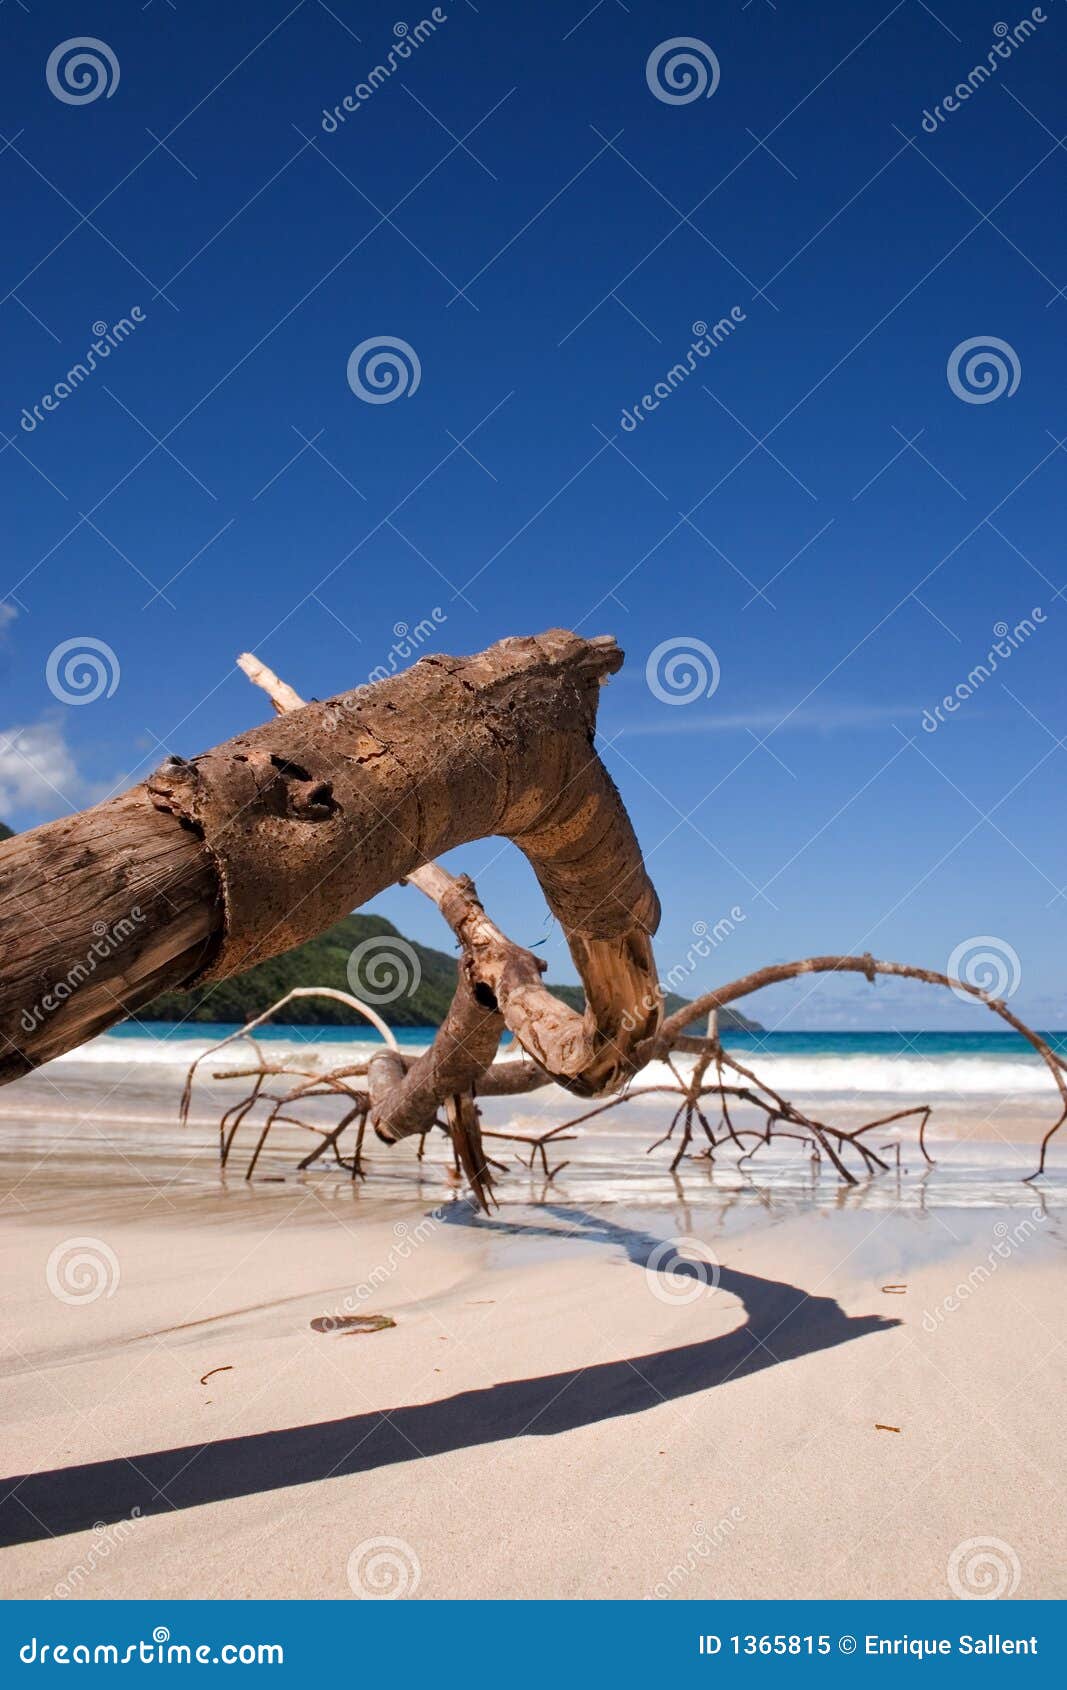 dry branch on the beach